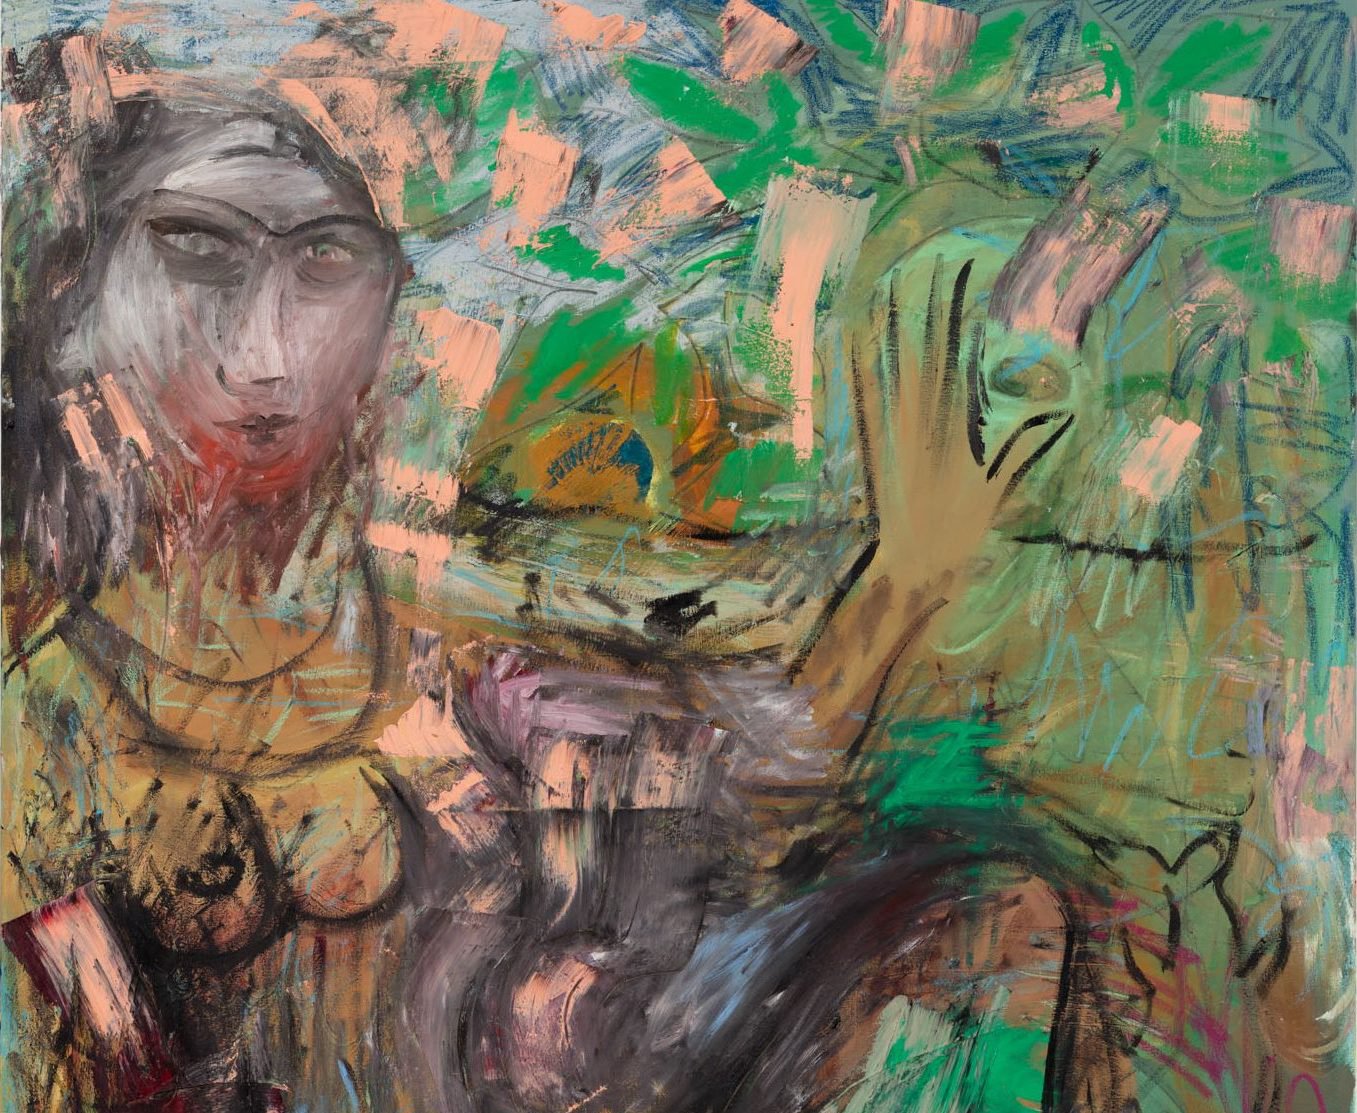 Lucy Stein, Self Portrait as High Priestess of the Green Flash, oil, acrylic and oil pastel on canvas, 160 x 120 cm, 2016